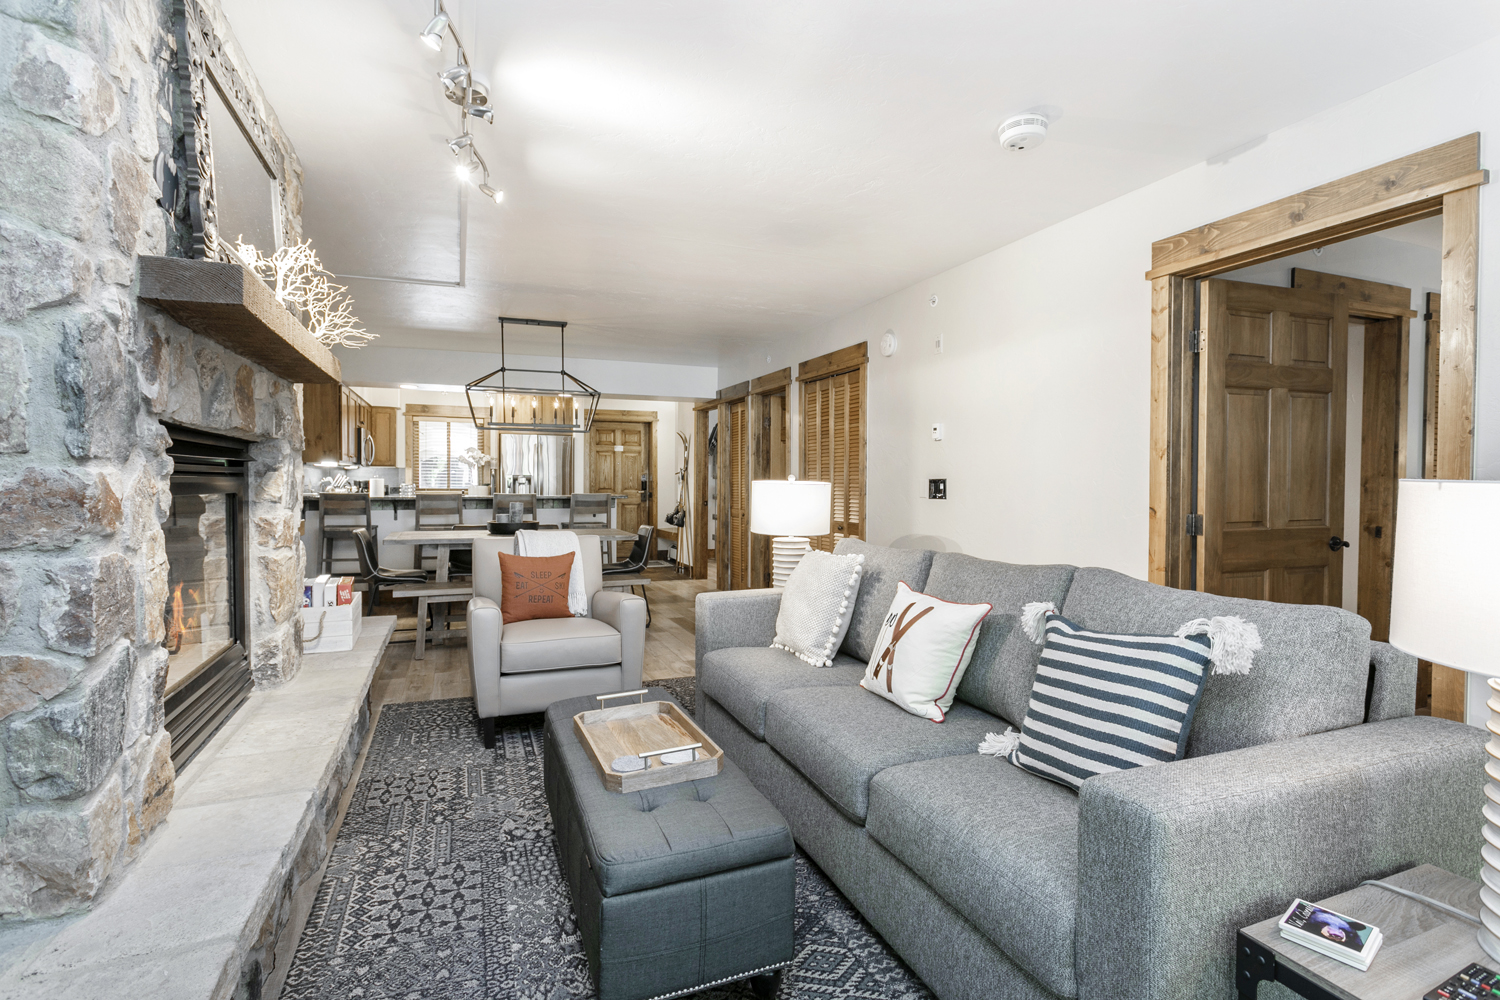 Antlers at Vail’s spacious condominiums are the perfect place to relax after a day of Colorado skiing – now with the option of enjoying a personal chef-prepared dinner.